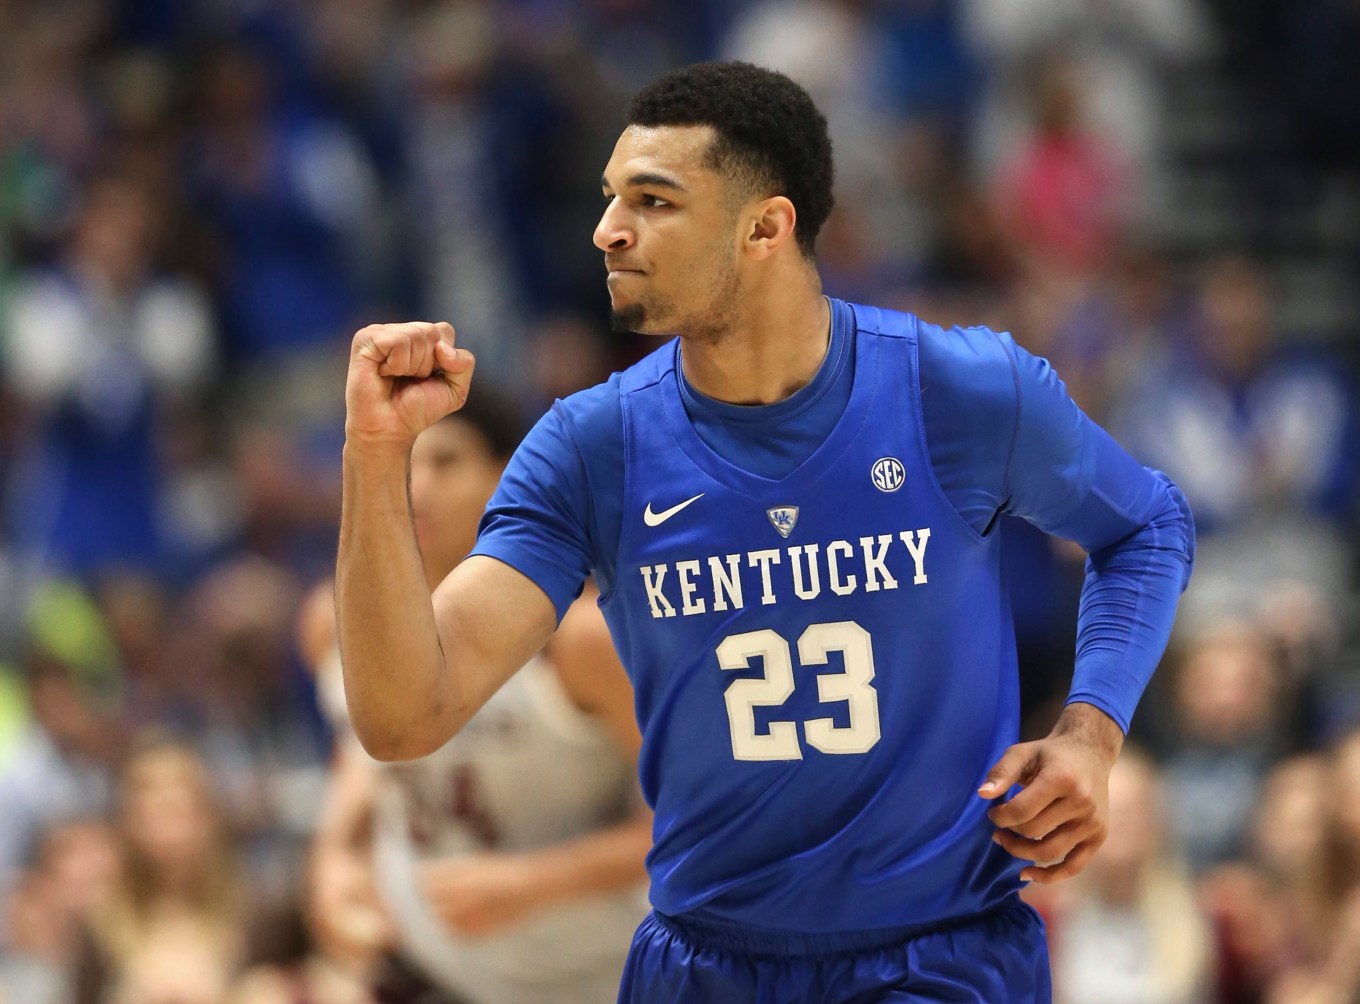 Kentucky's Jamal Murray (23) celebrates after a basket against Texas A&M during the first half of an NCAA college basketball game in the championship of the Southeastern Conference tournament in Nashville, Tenn., Sunday, March 13, 2016. (AP Photo/John Bazemore)